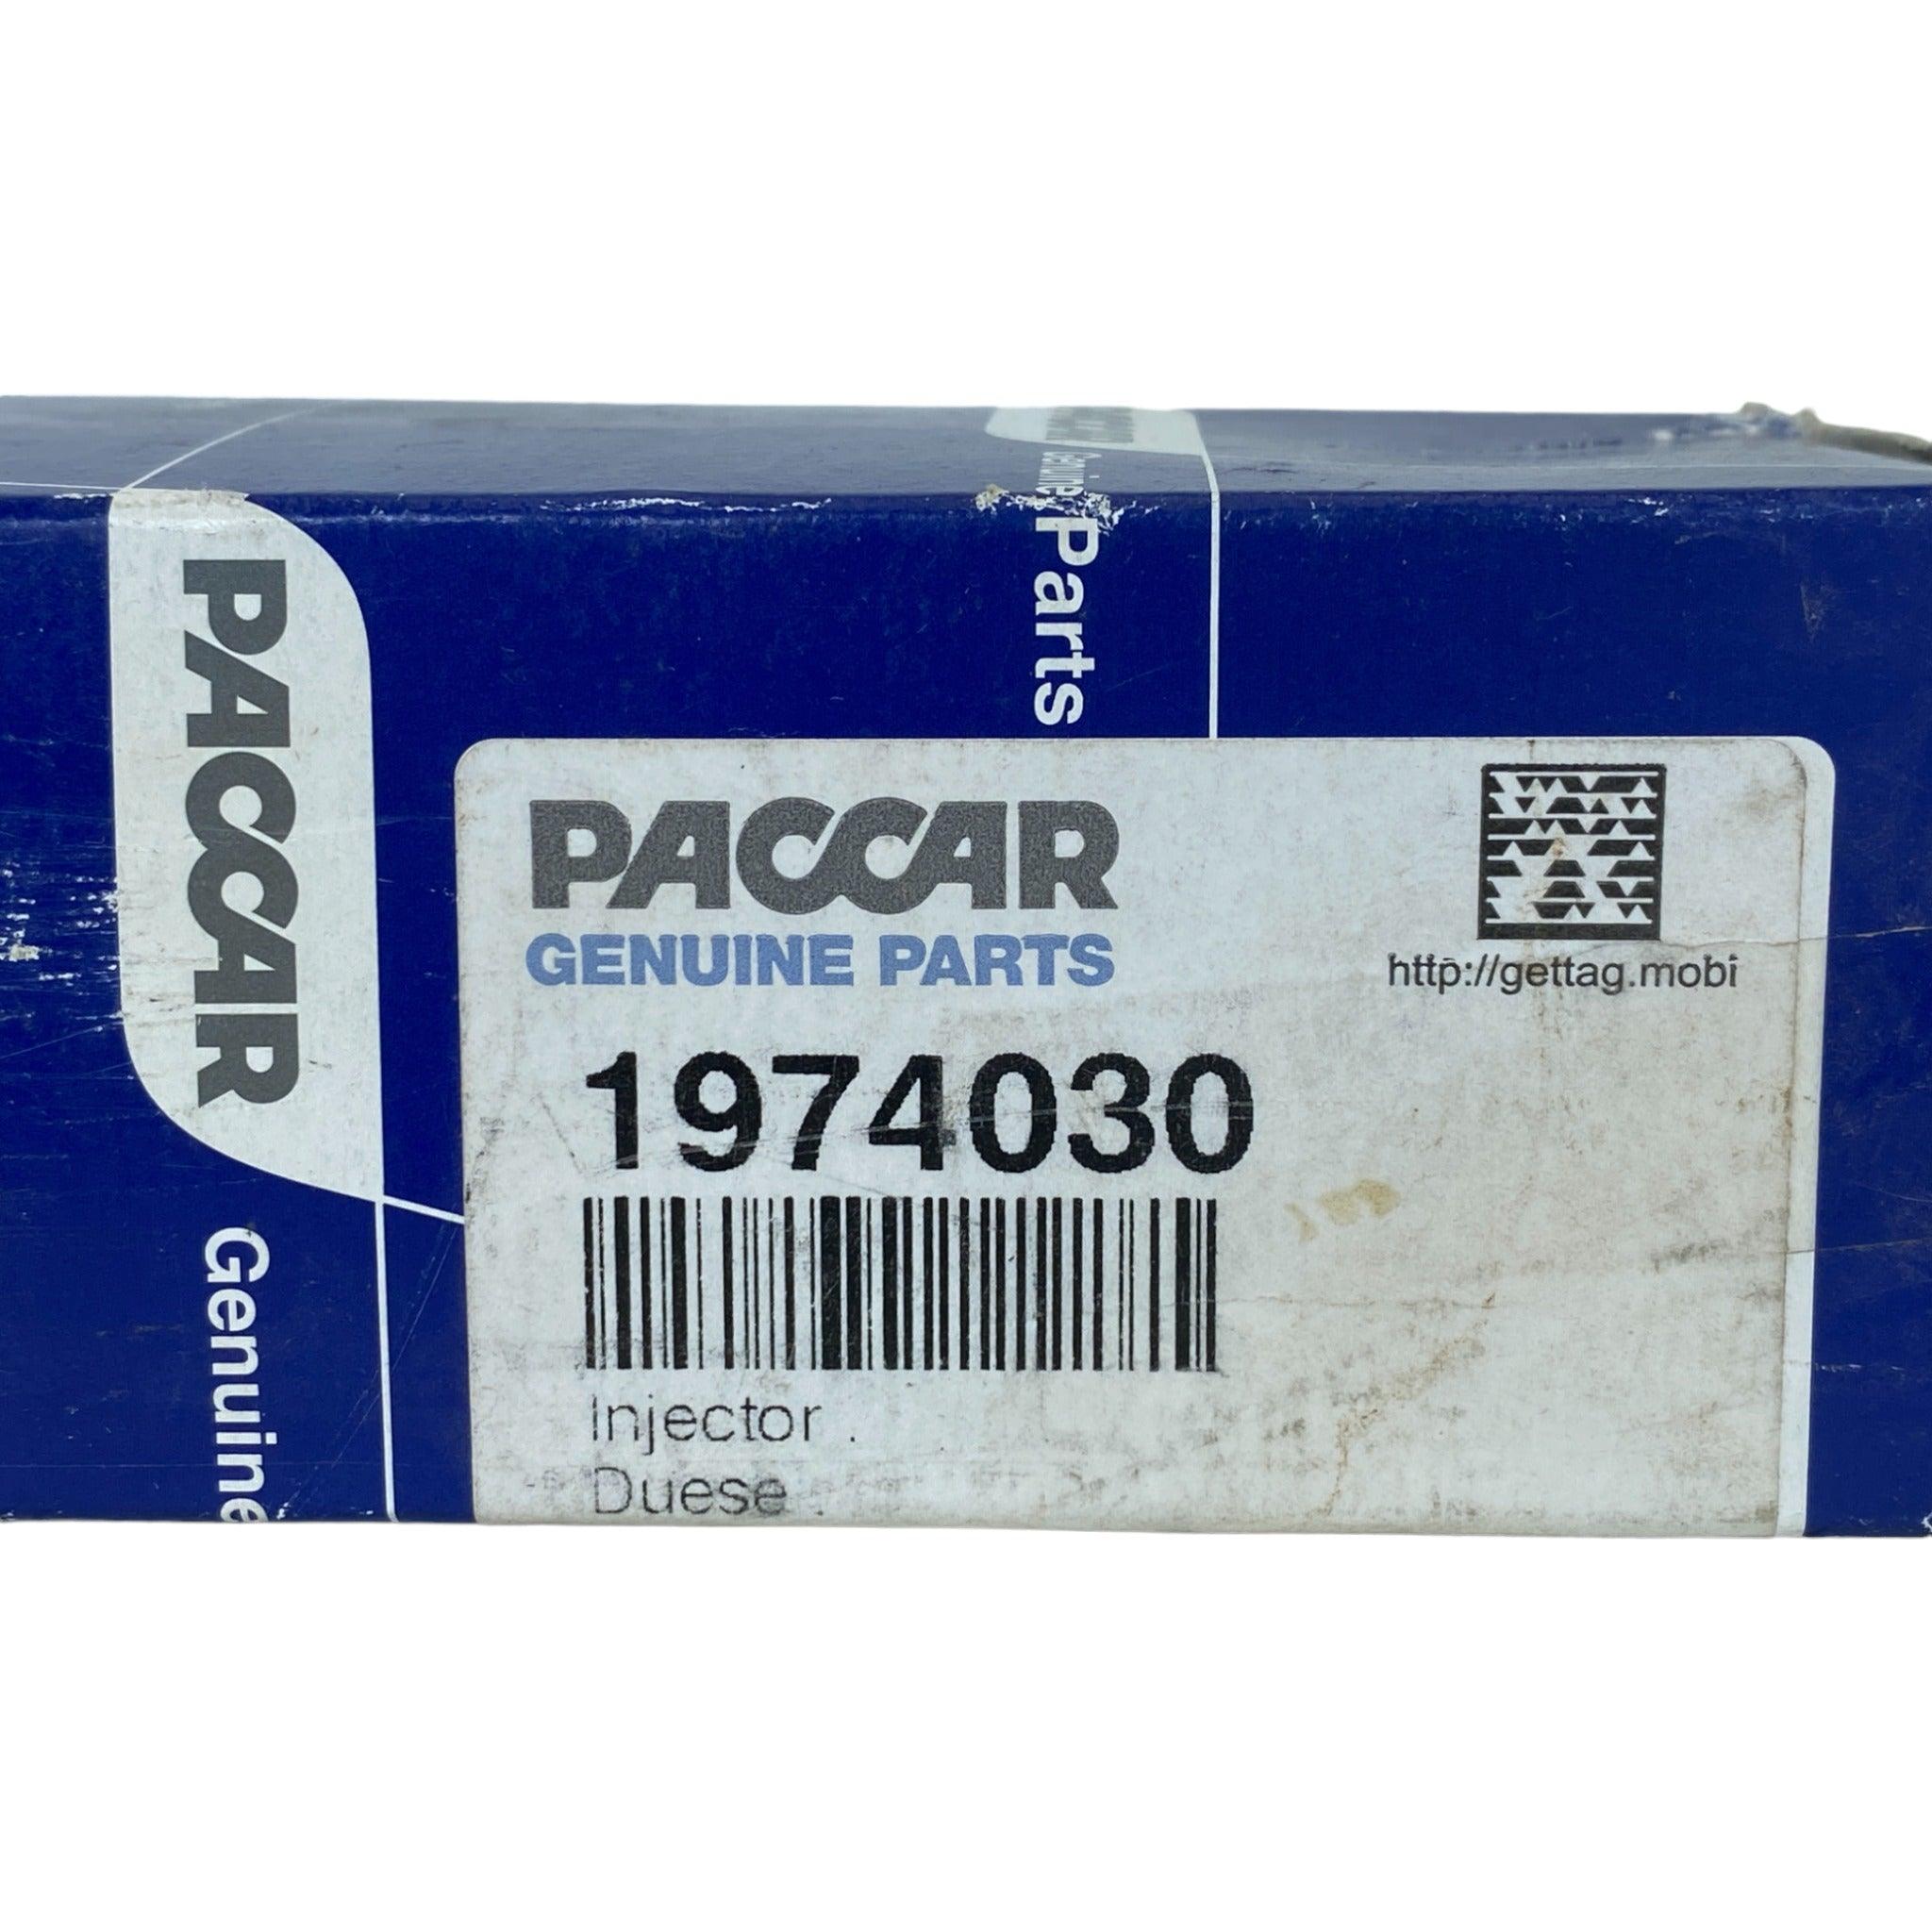 1974030 Genuine Paccar® Injector For Mx-11 Epa13 - ADVANCED TRUCK PARTS